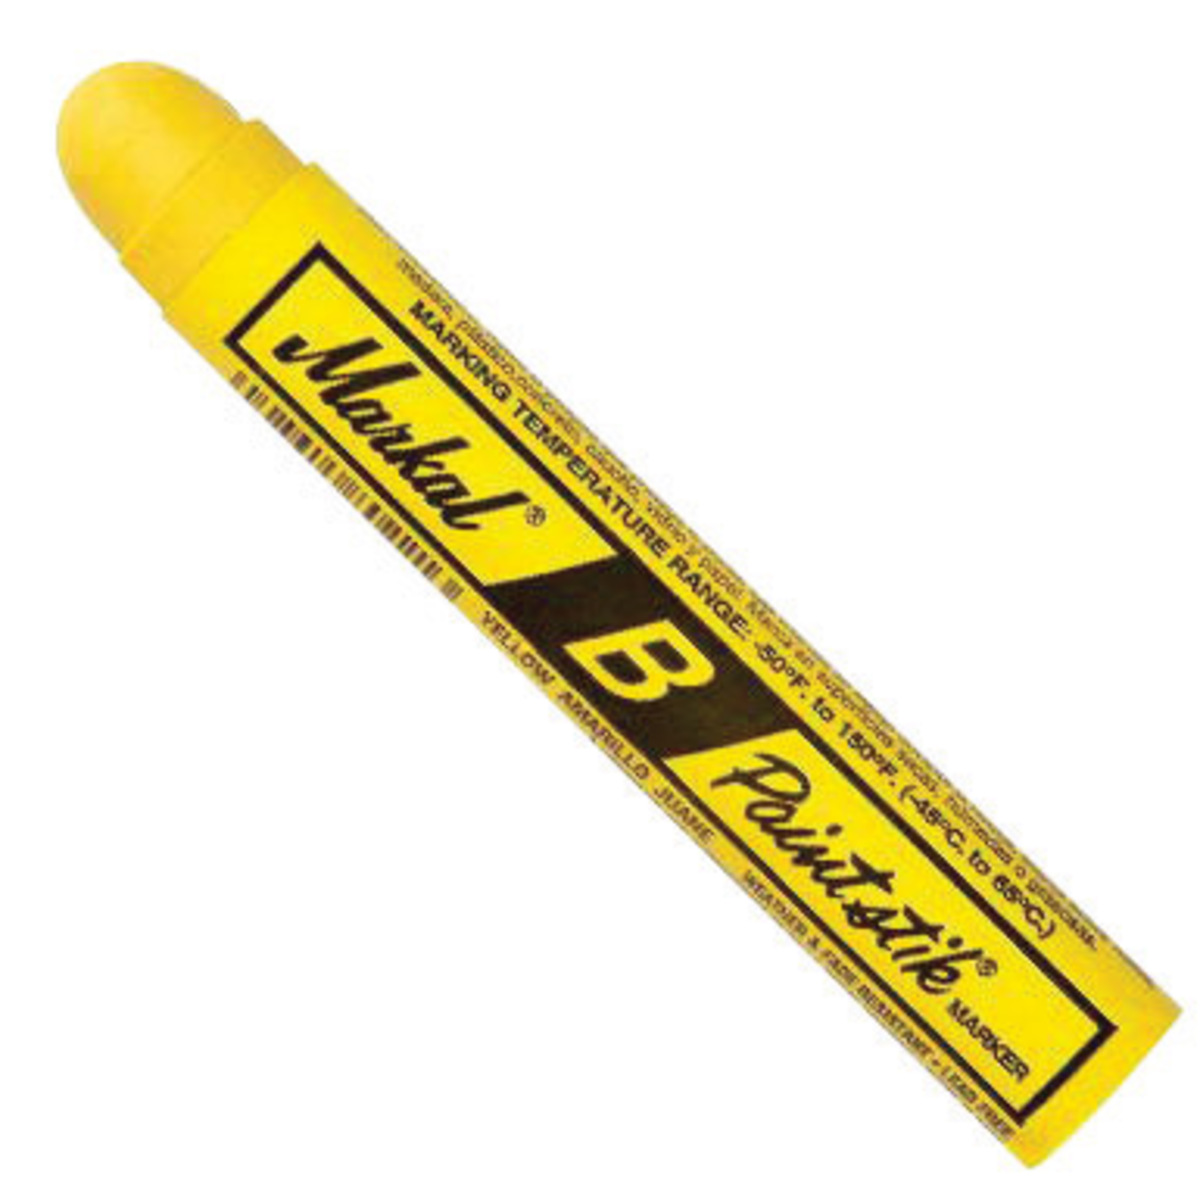 La-Co Markal Ball Paint Marker 84621 Yellow Paint Marker, 1/8 Inch Steel  Ball Tip 84621 MKL84621 - Gas and Supply